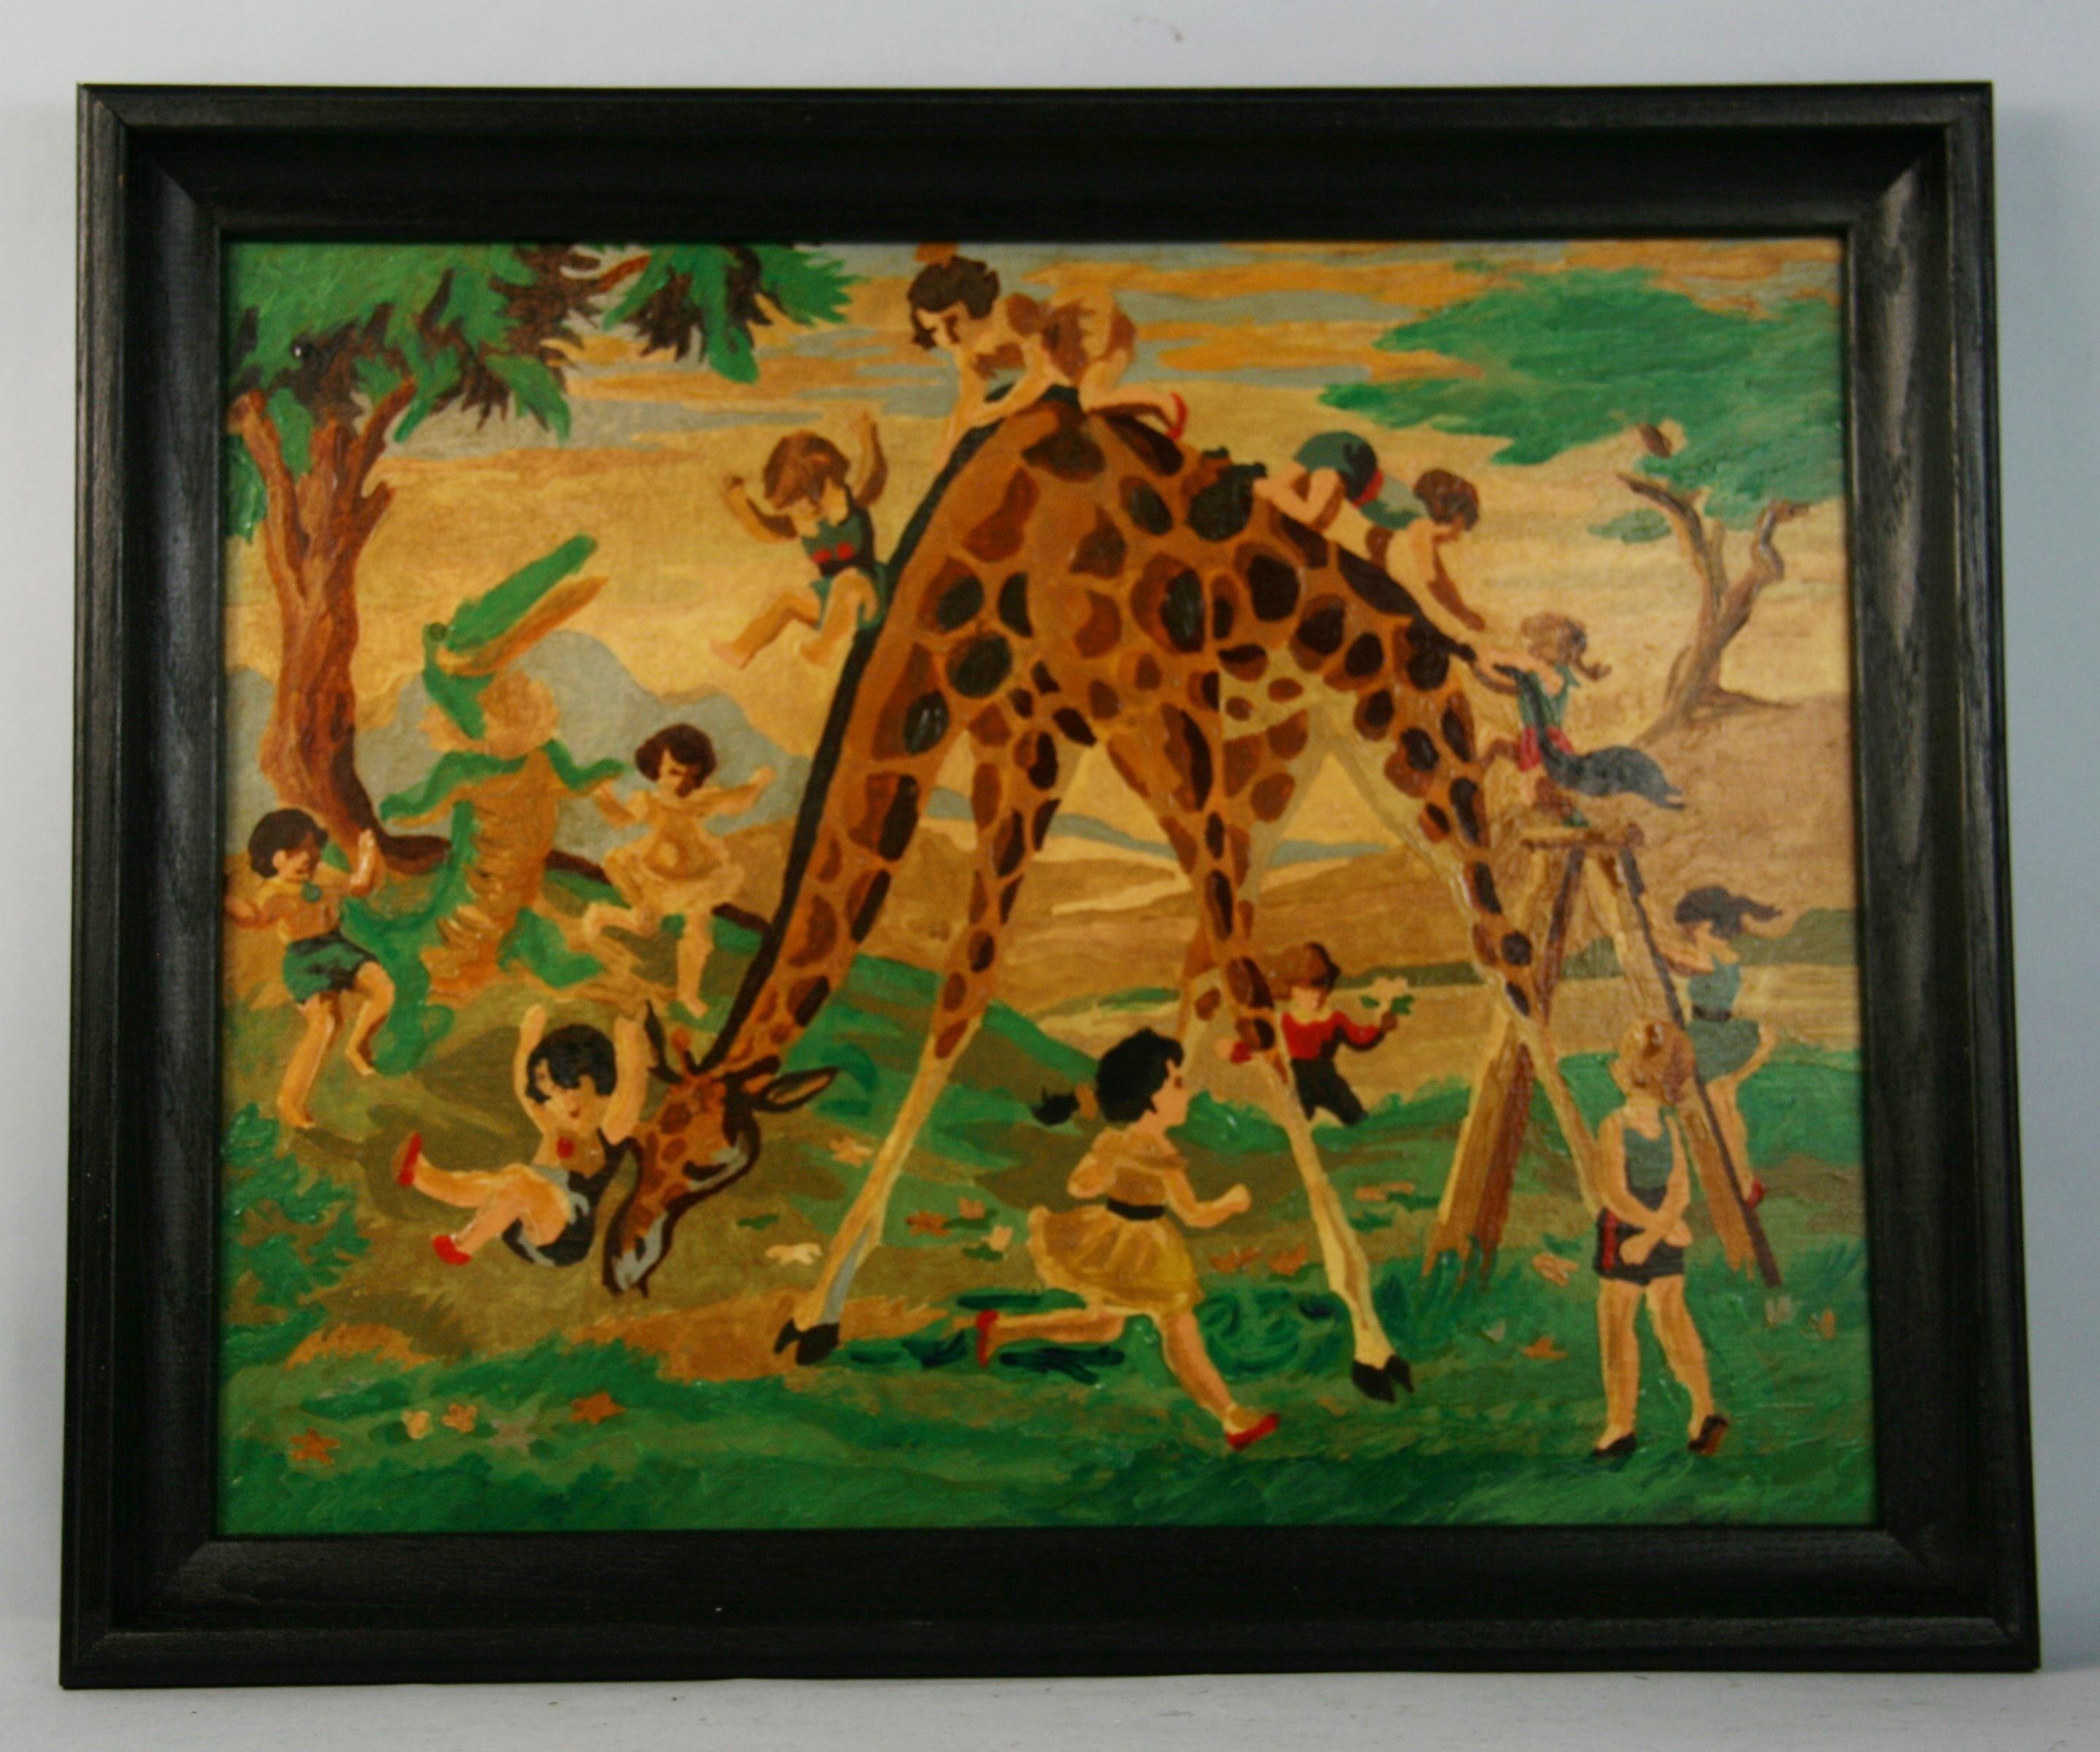 Riding a Giraffe Surreal  Oil Painting 1956 For Sale 1